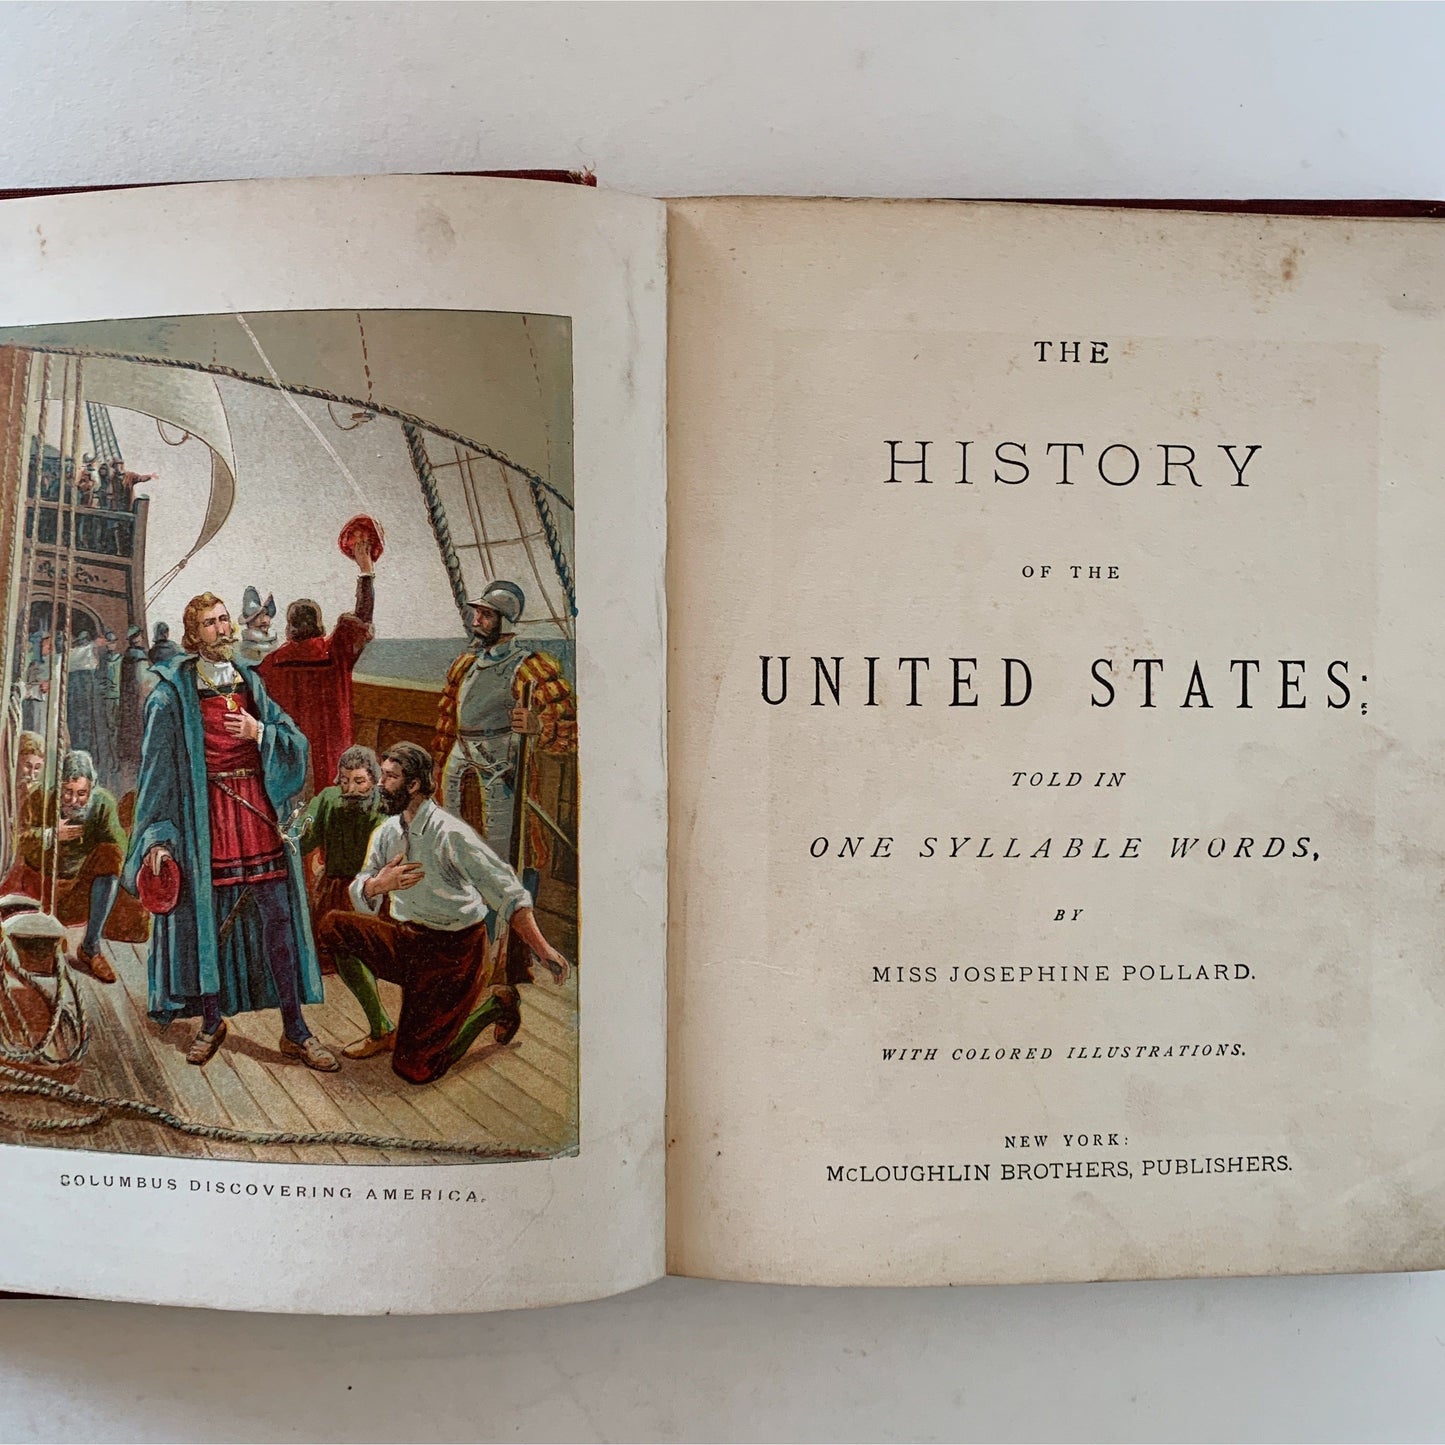 The History of the United States Told in One Syllable Words, Illustrated